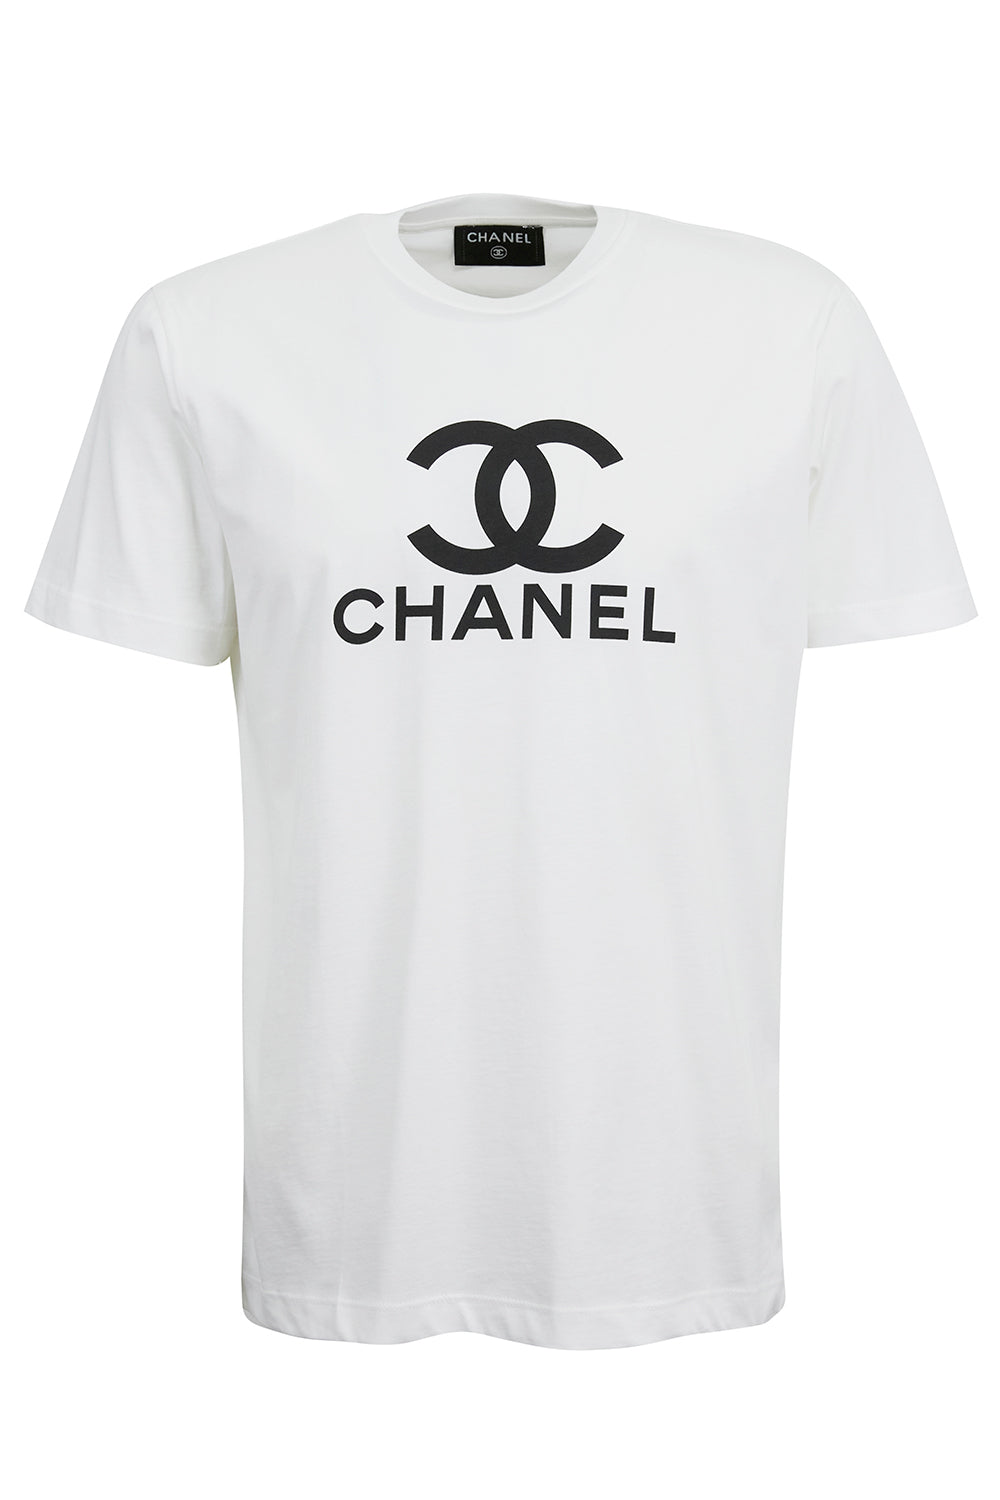 Coco Chanel T Shirts for Men (Unisex) – REMO Since 1988